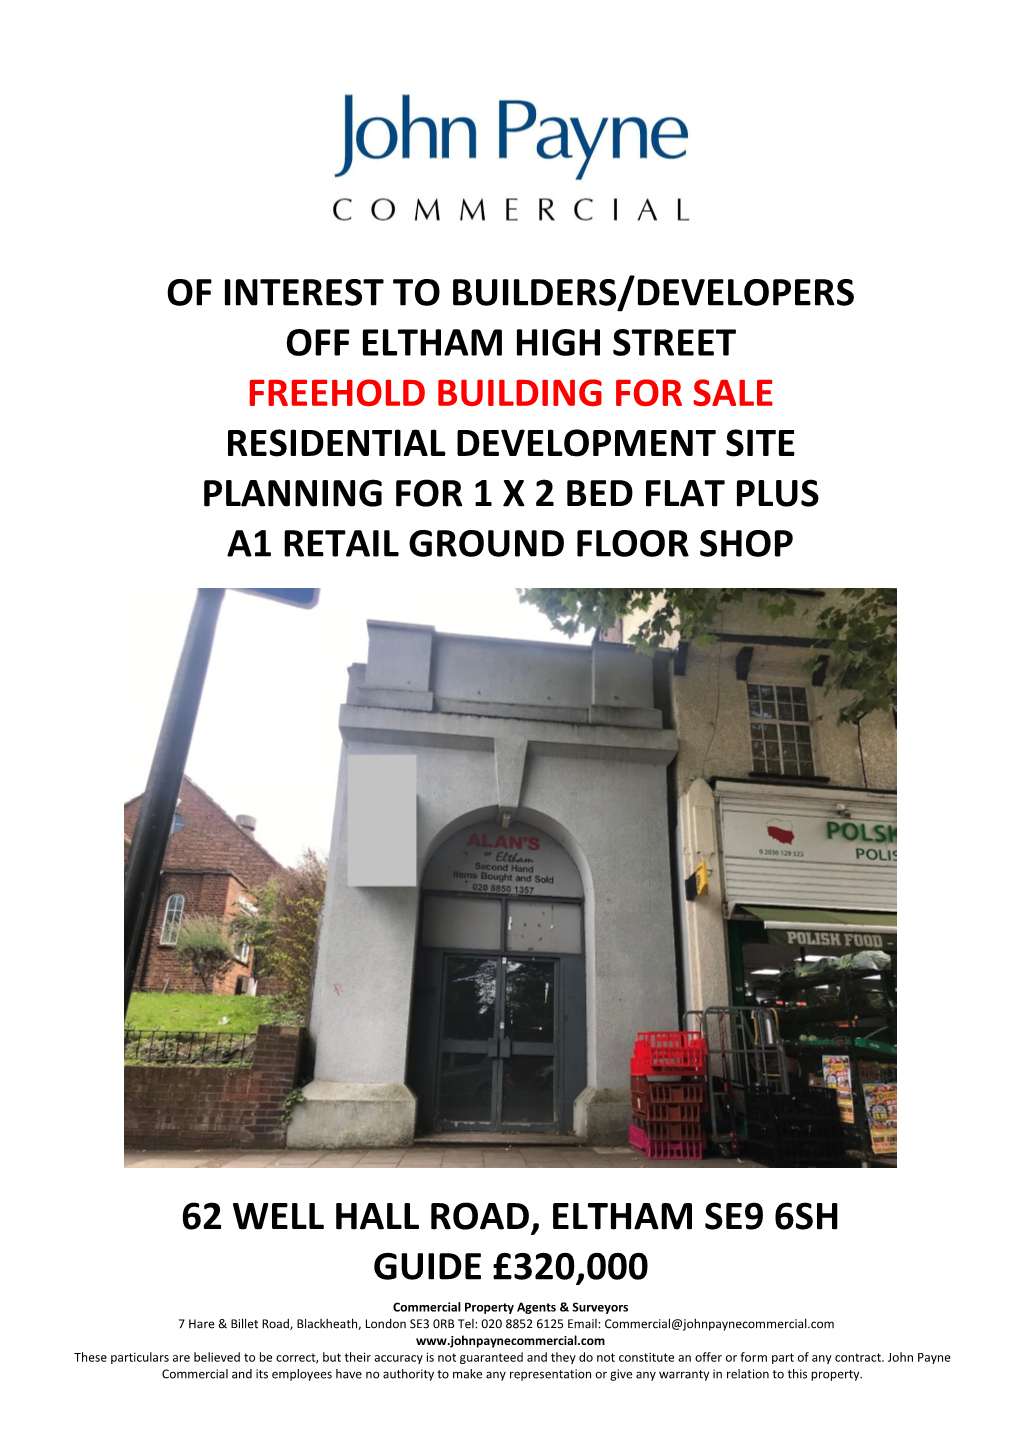 Of Interest to Builders/Developers Off